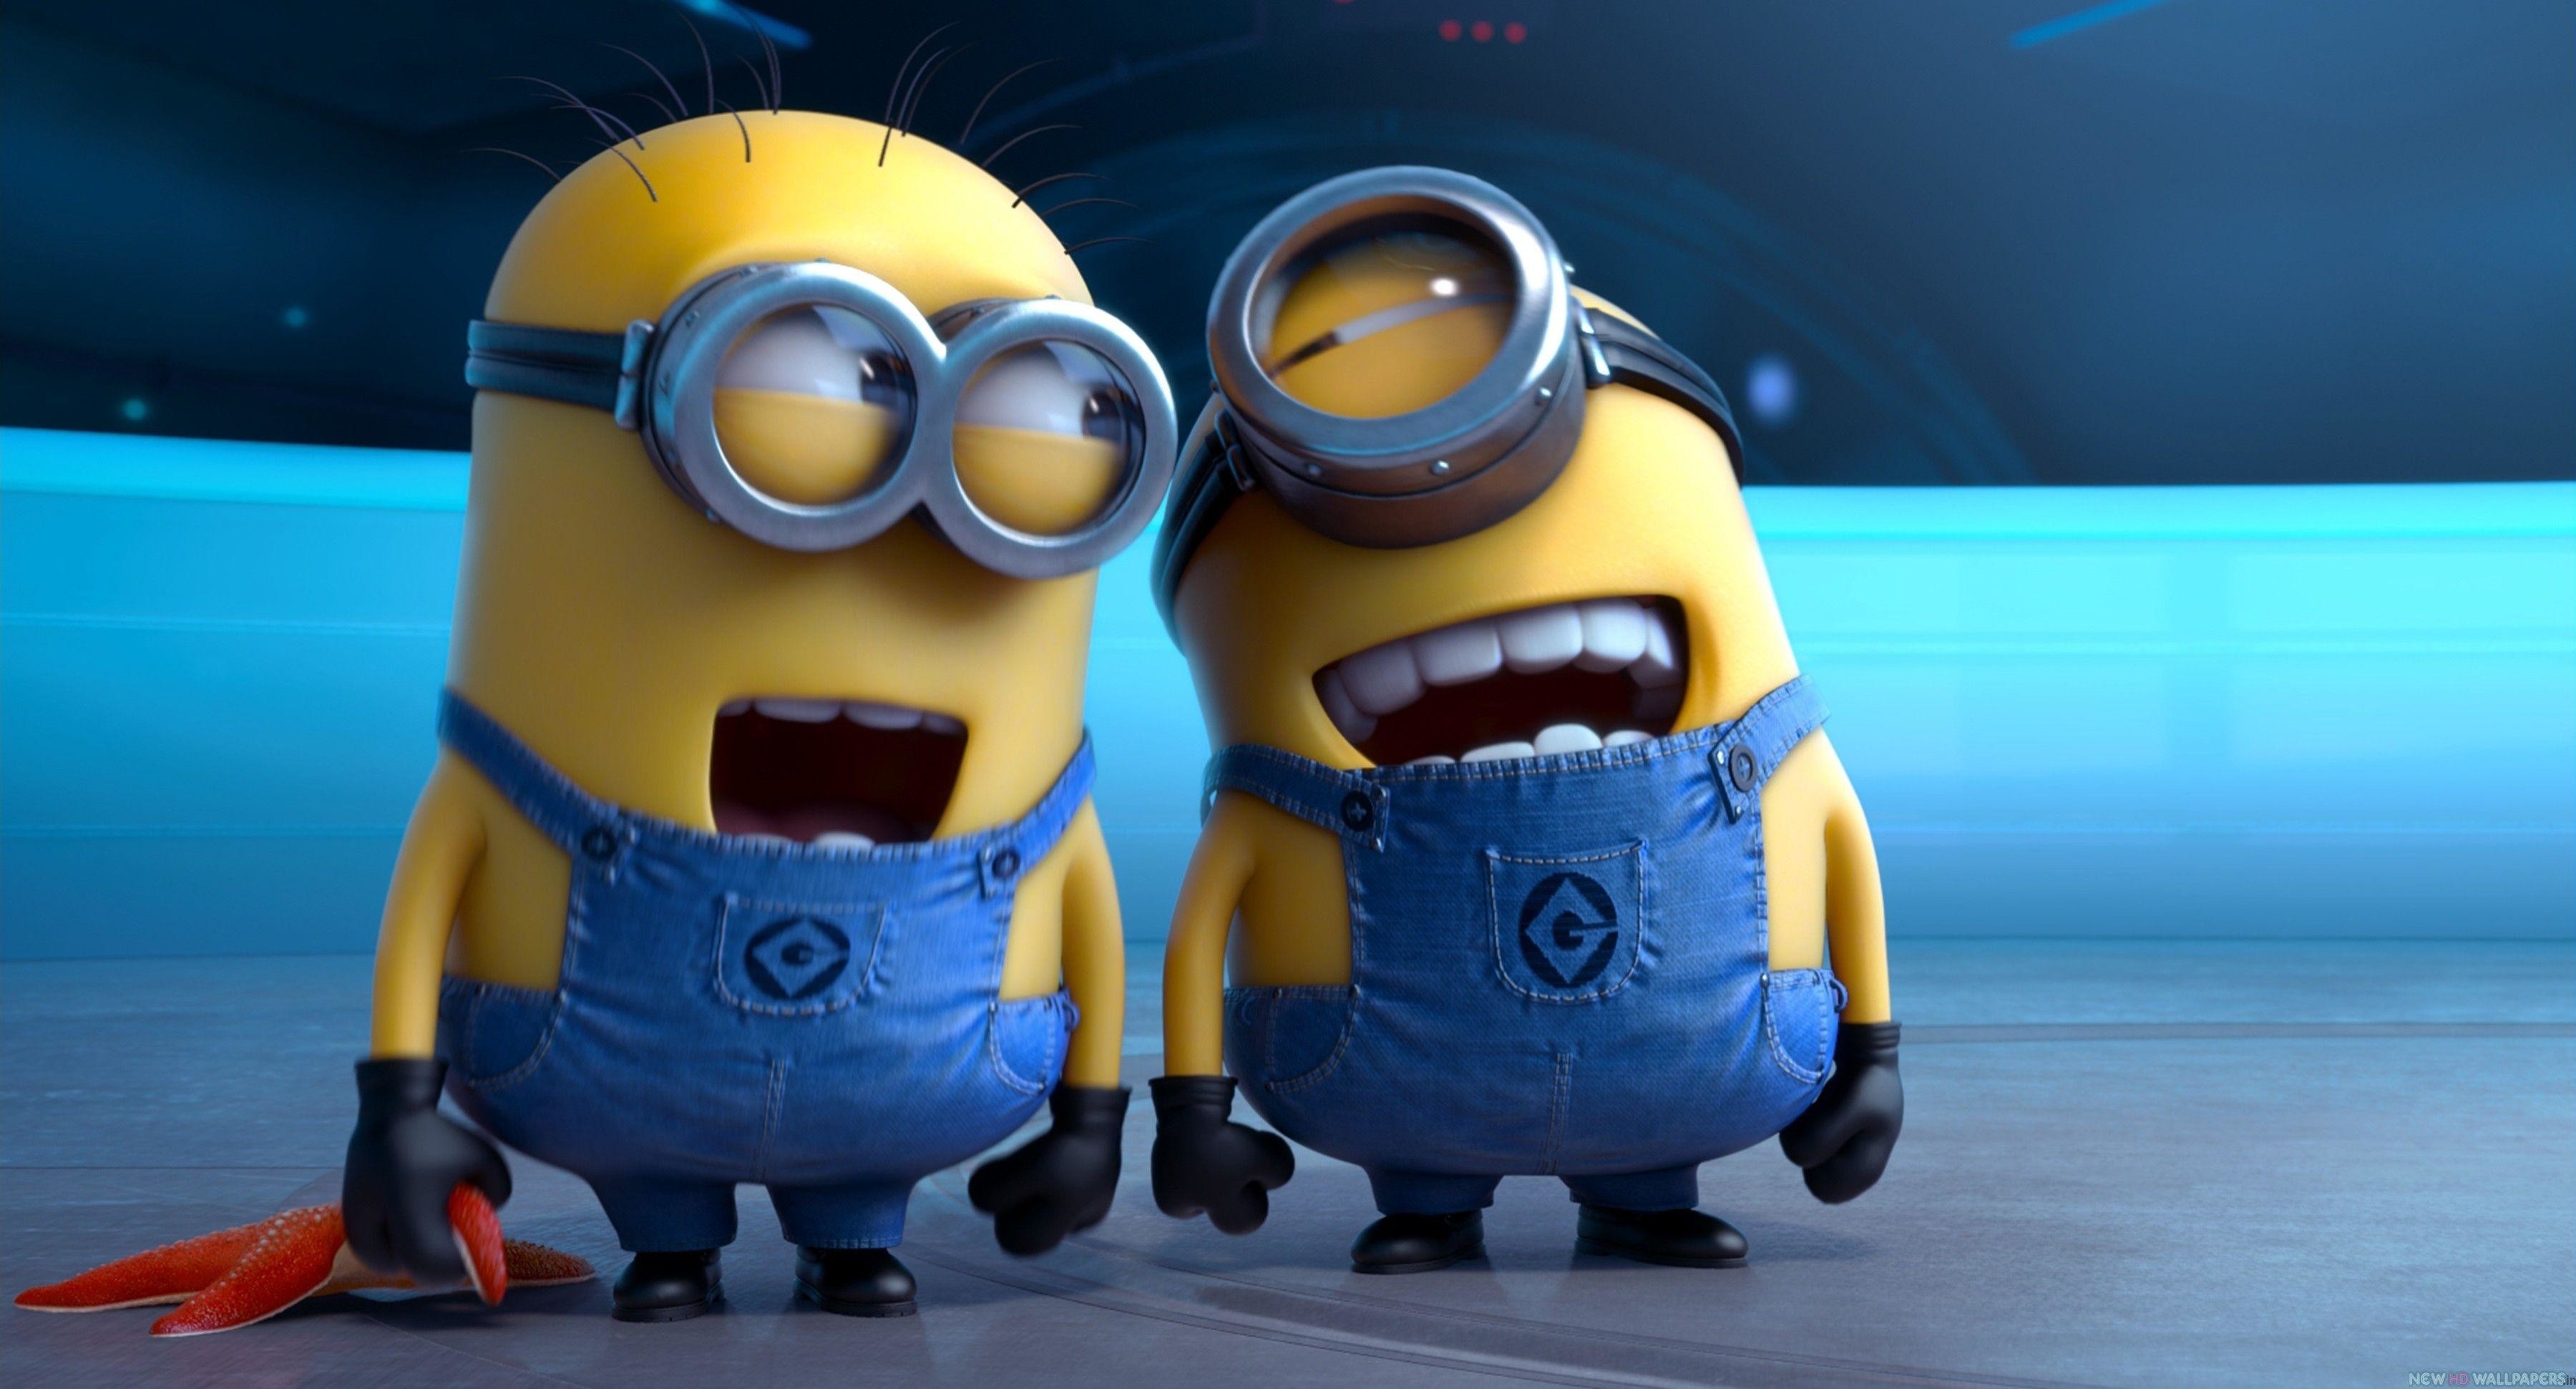 3600x1941 Download HD Minion Wallpapers for Mobile Phones | Techbeasts